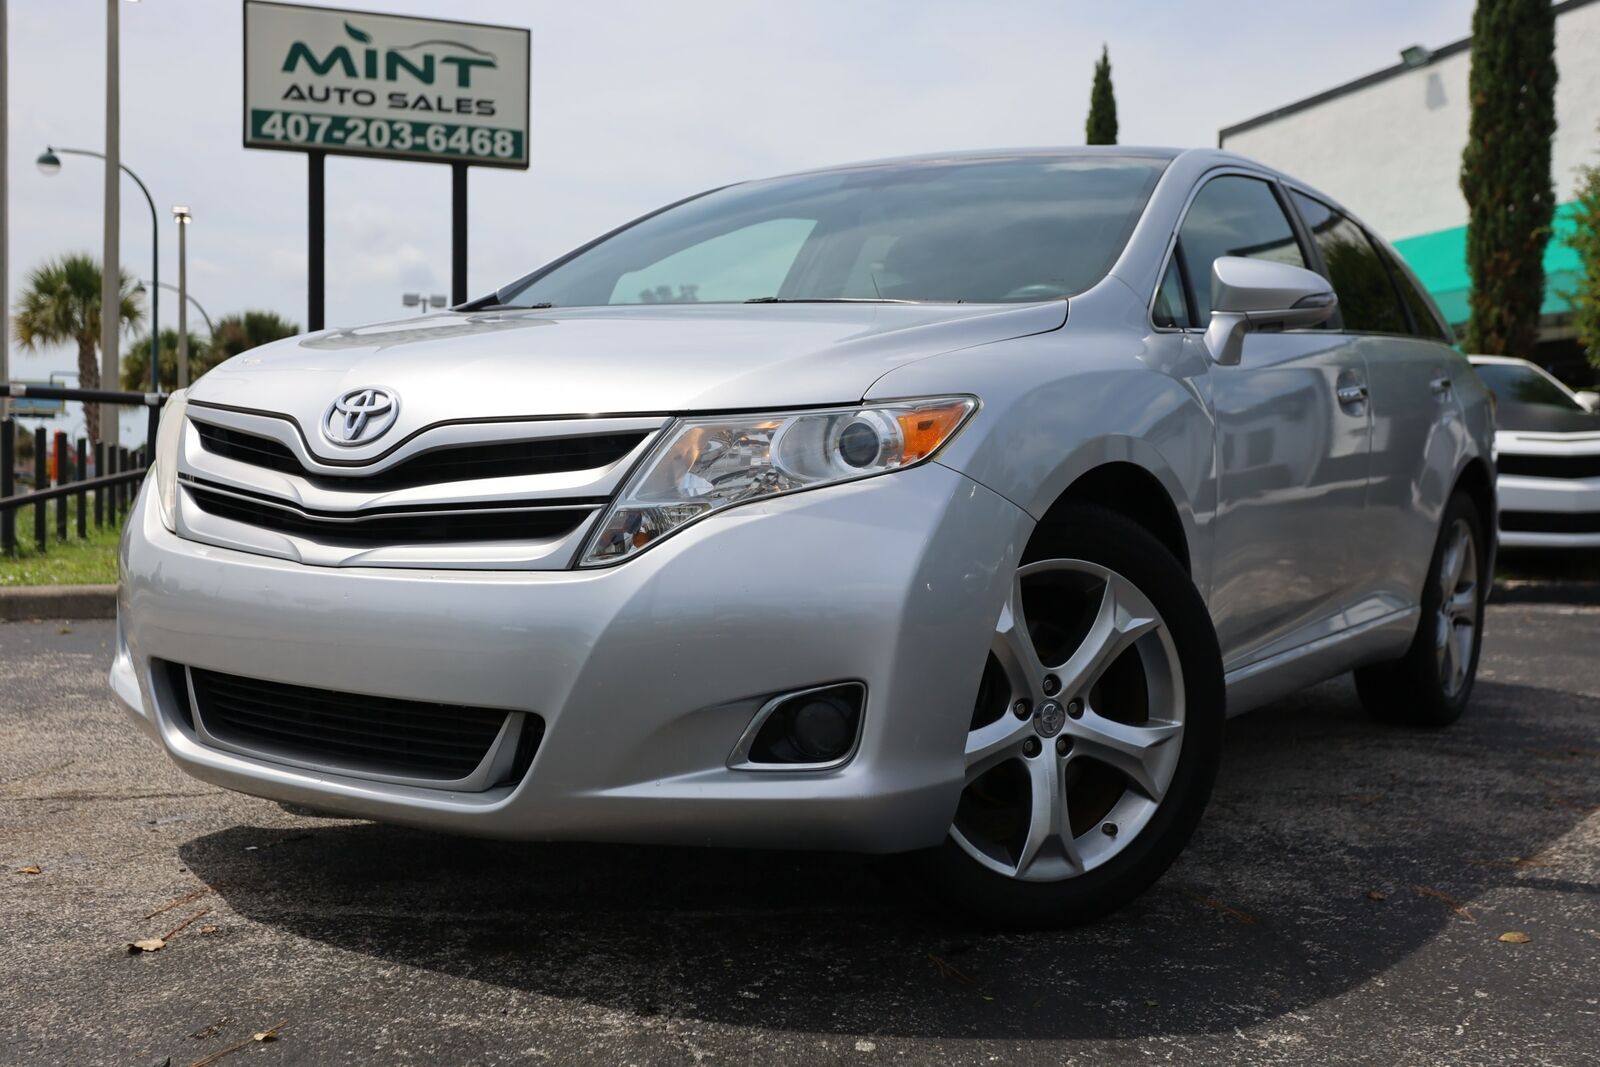 2013 Toyota Venza Le V6 2013 Toyota Venza, Silver With 91340 Miles Available Now!